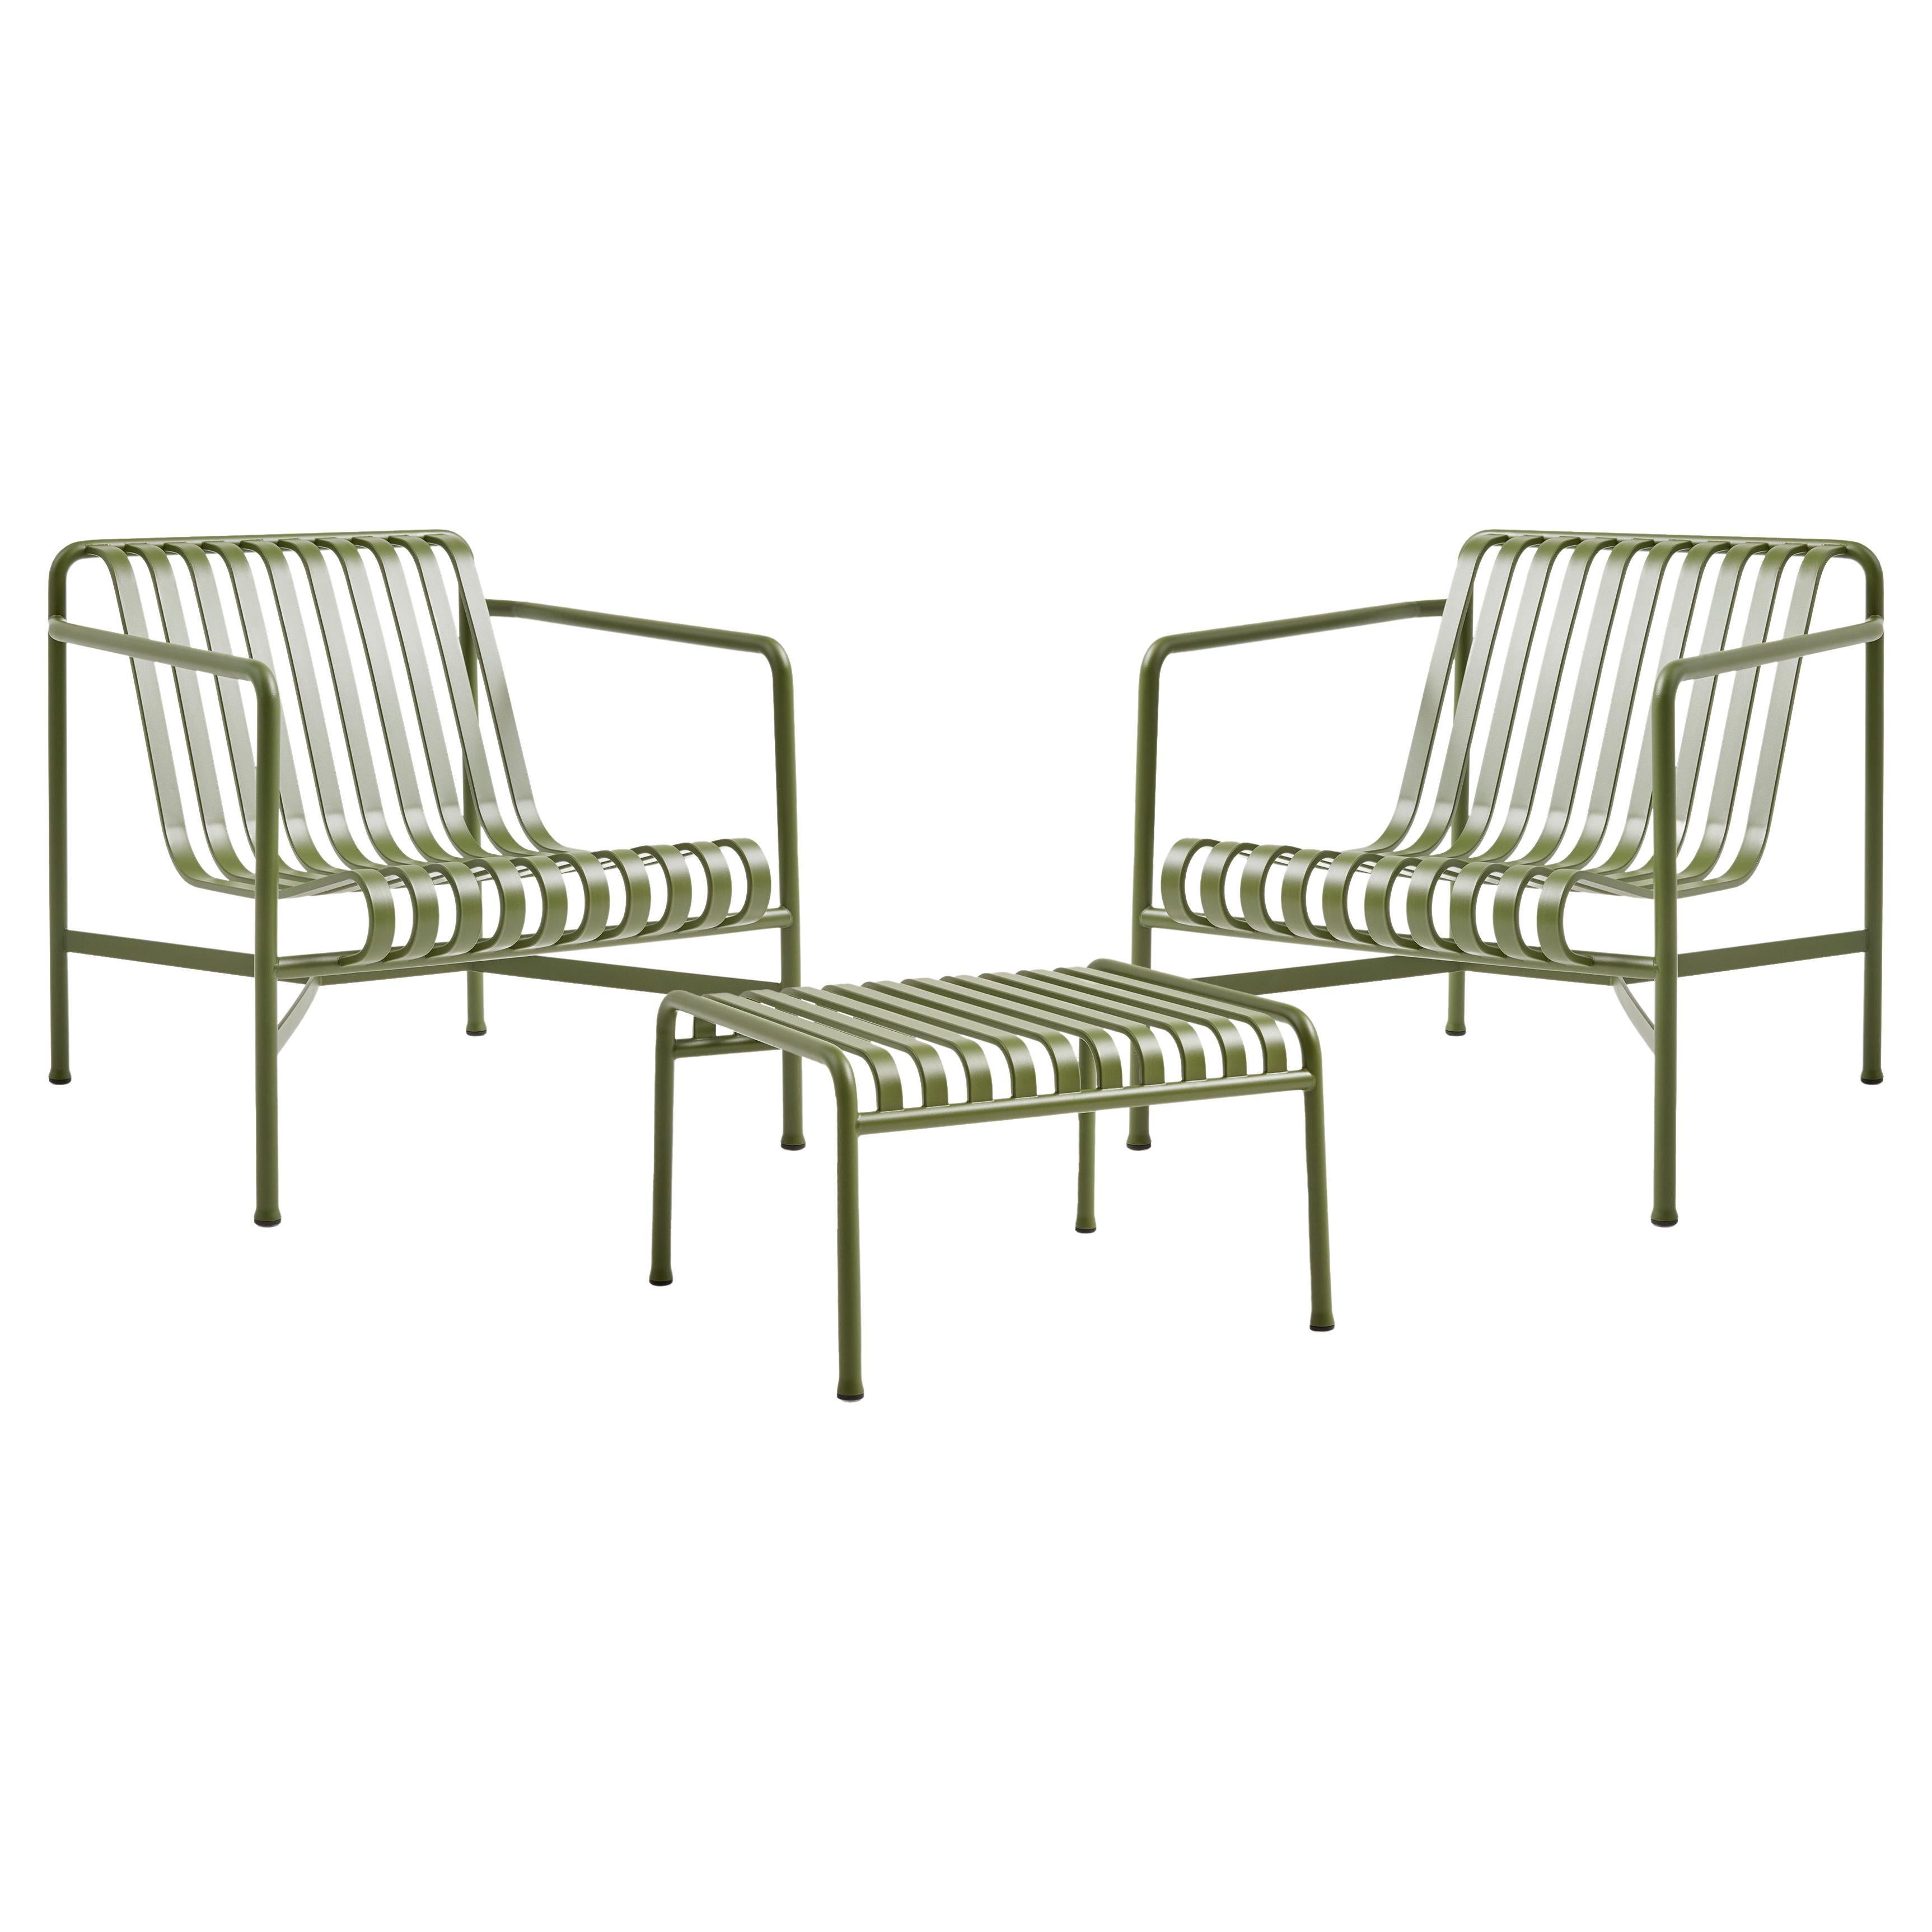 Set of Palissade Lounge Chairs & Ottoman Olive by Ronan/Erwan Bouroullec for Hay For Sale